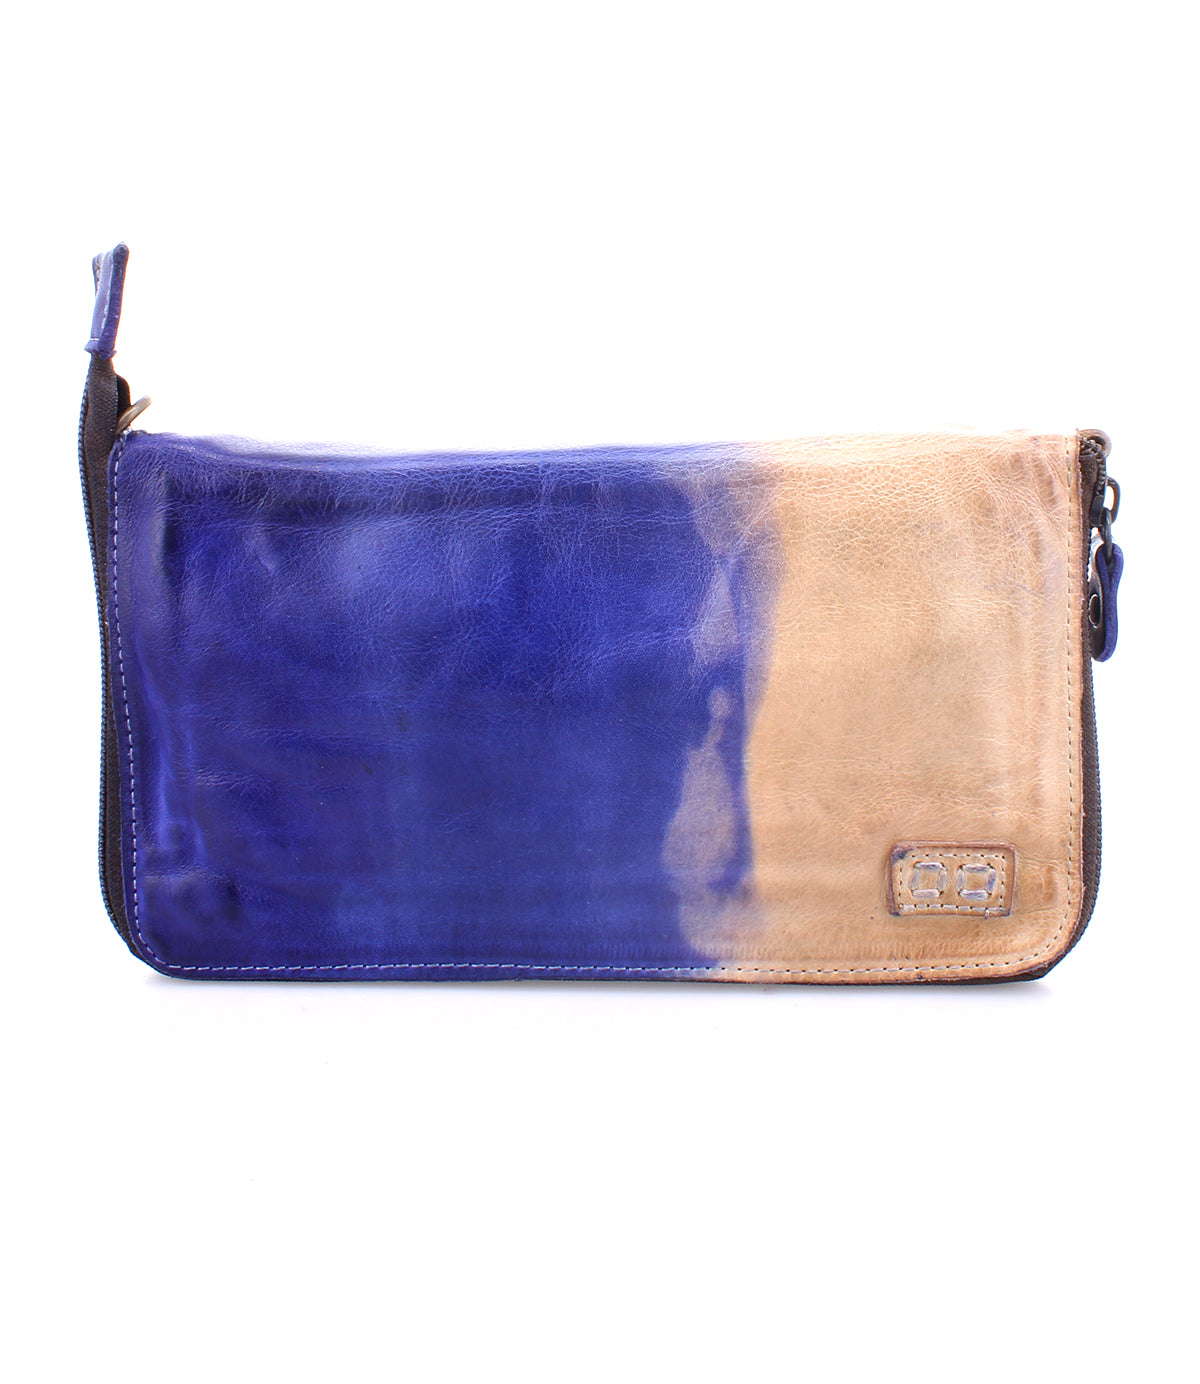 A blue and tan Bed Stu Templeton II wallet with a zipper, perfect for storing your belongings securely.